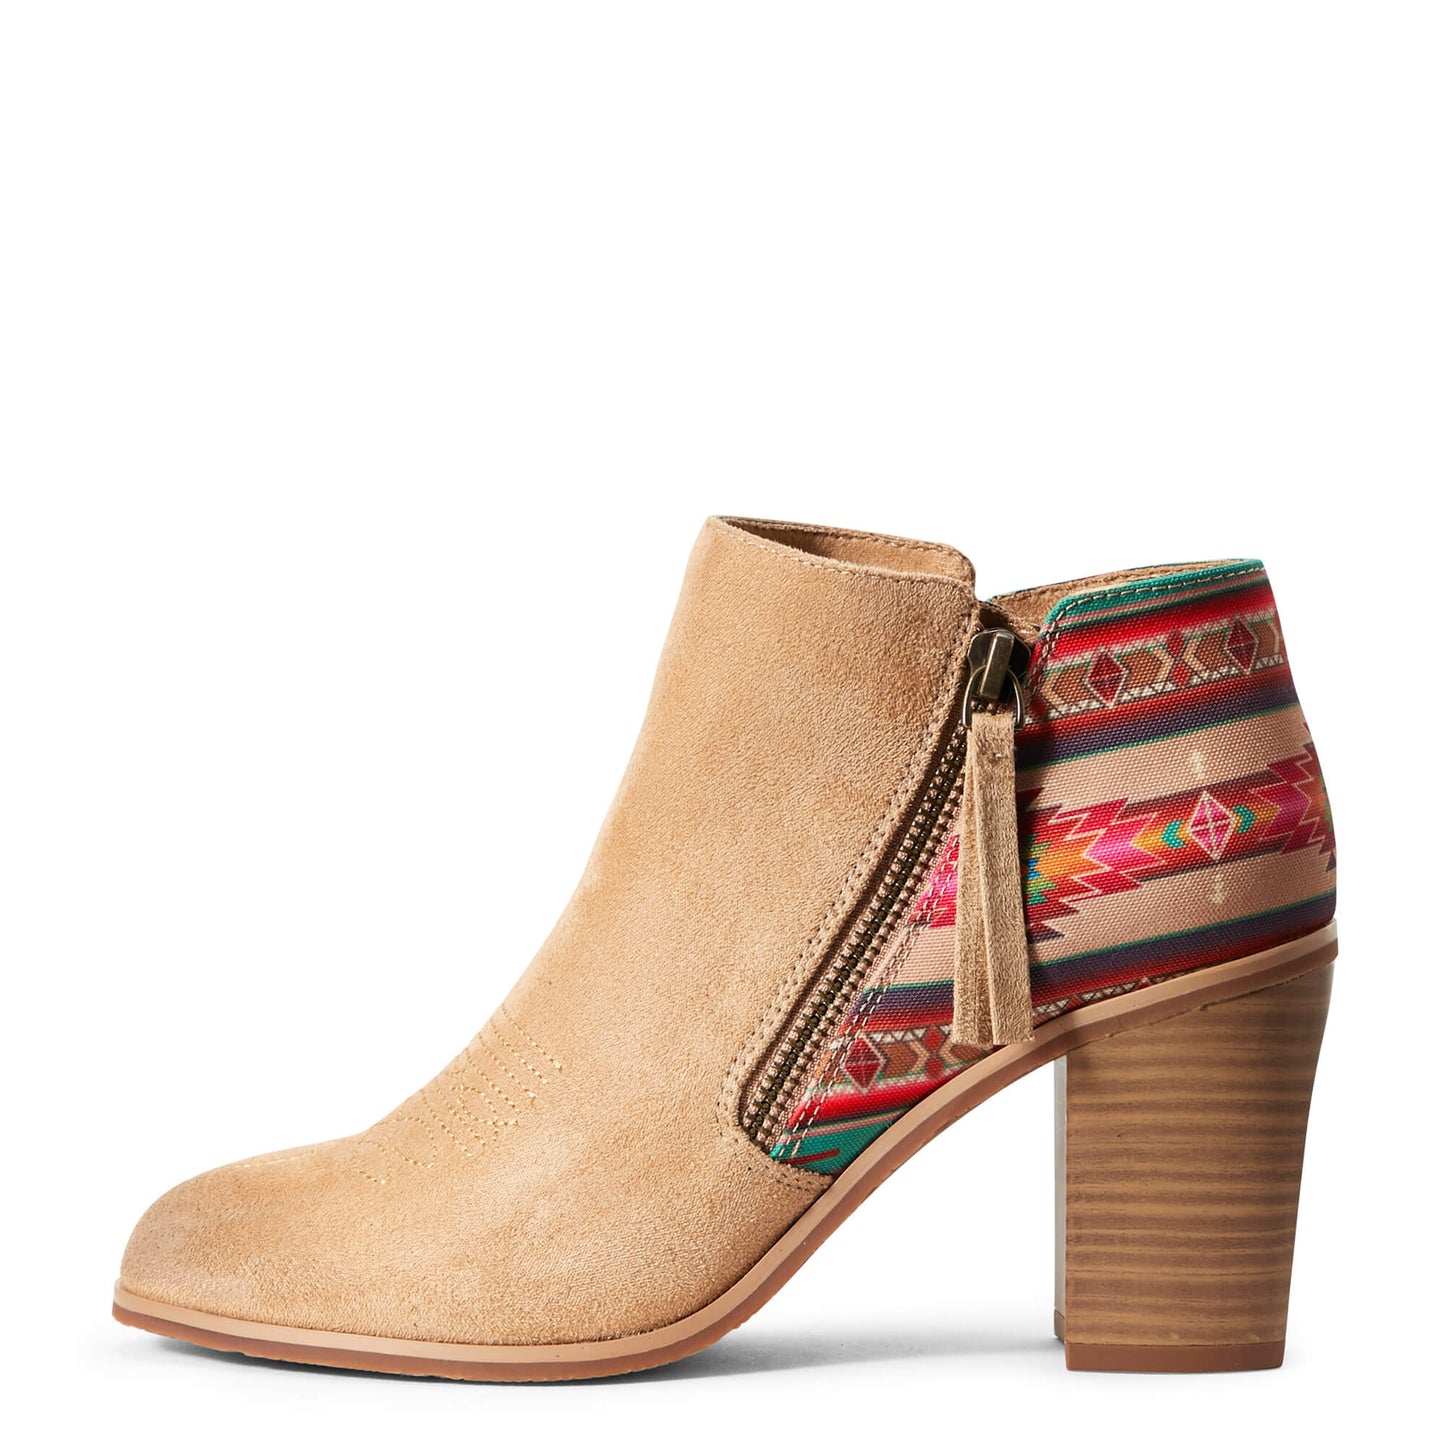 Women's Ariat Unbridled Kaylee Light Tan Suede and Aztec Boots